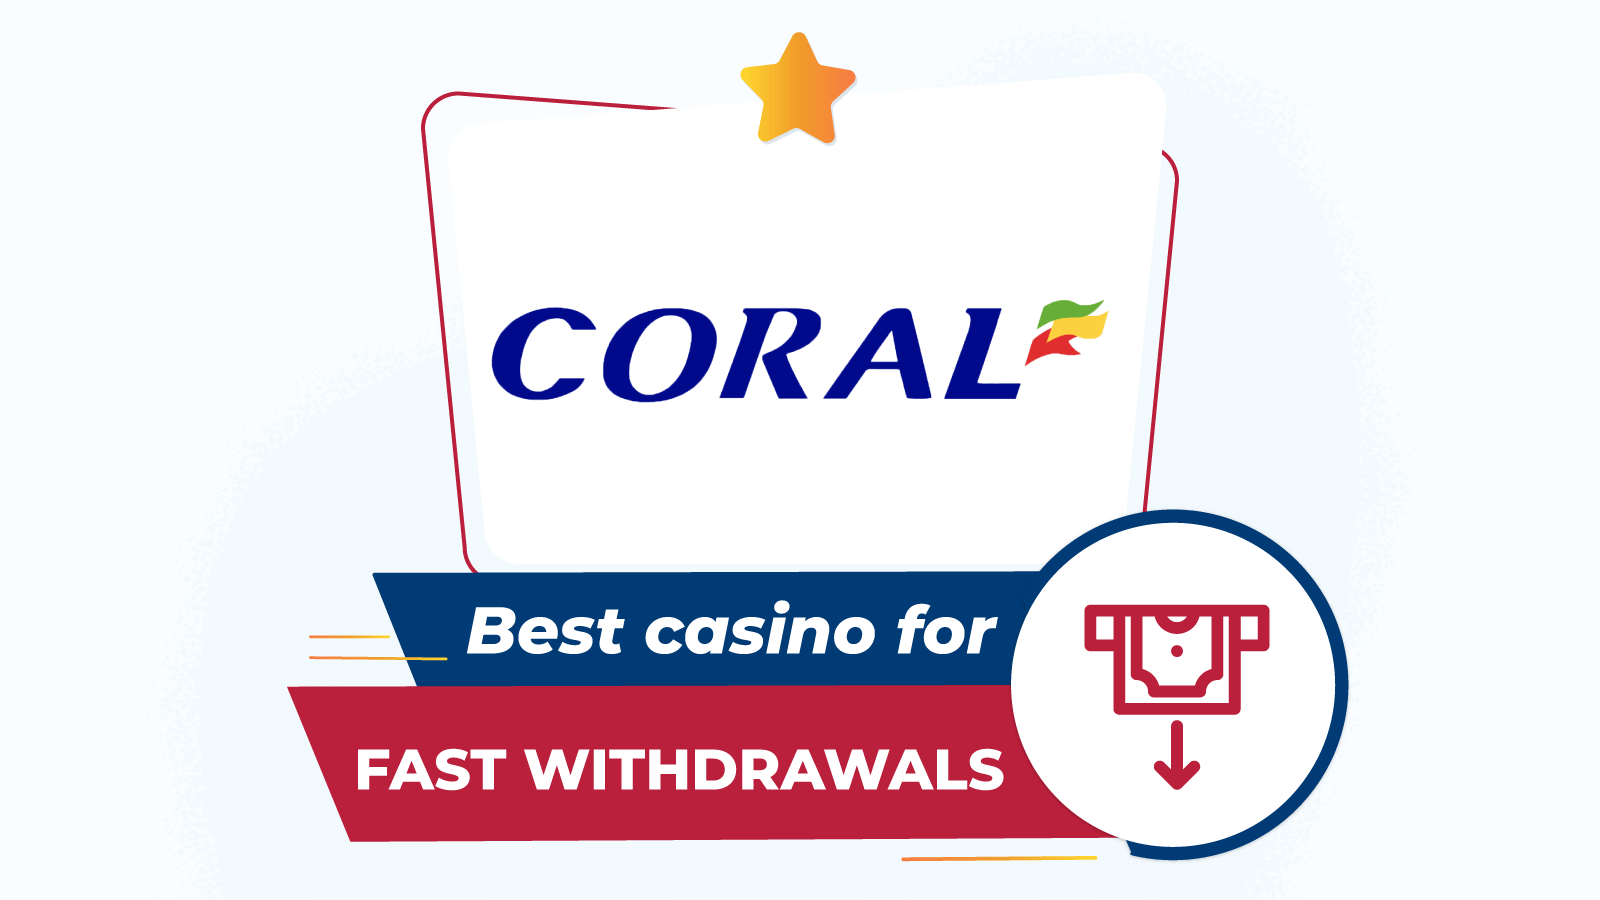 #2. Coral Casino – Best for Fast Withdrawals